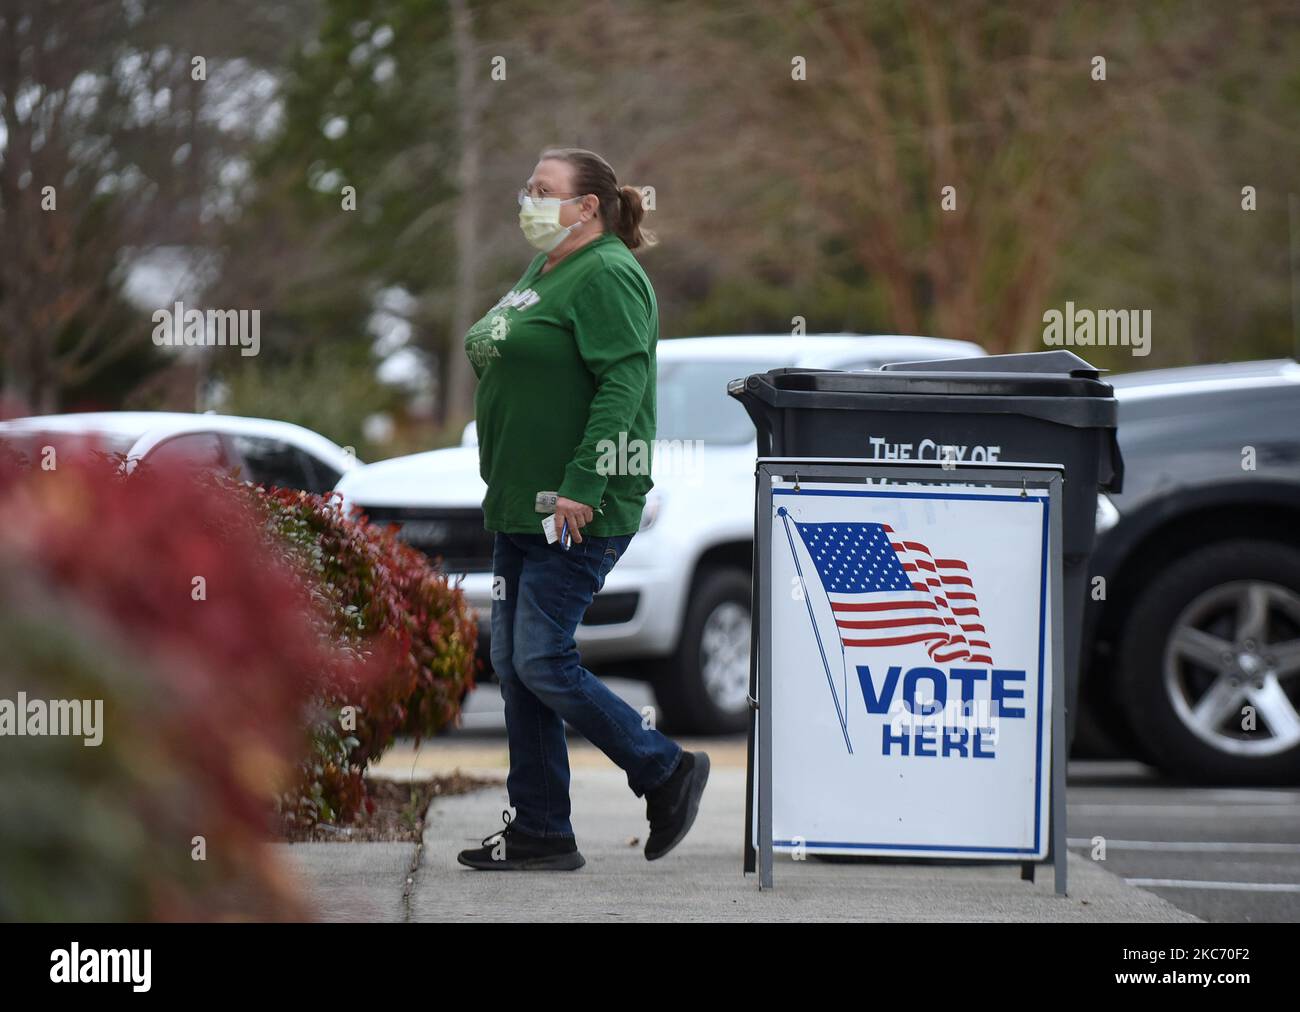 A voter arrives at a polling place at Varnell gymnasium on January 5, 2021 in Dalton, Georgia, USA. Republican Senators Kelly Loeffler and David Perdue are candidates in a run-off election on January 5 with Democrats Raphael Warnock and Jon Ossoff in a pair of contests which will determine which party controls the U.S. Senate. (Photo by Paul Hennessy/NurPhoto) Stock Photo